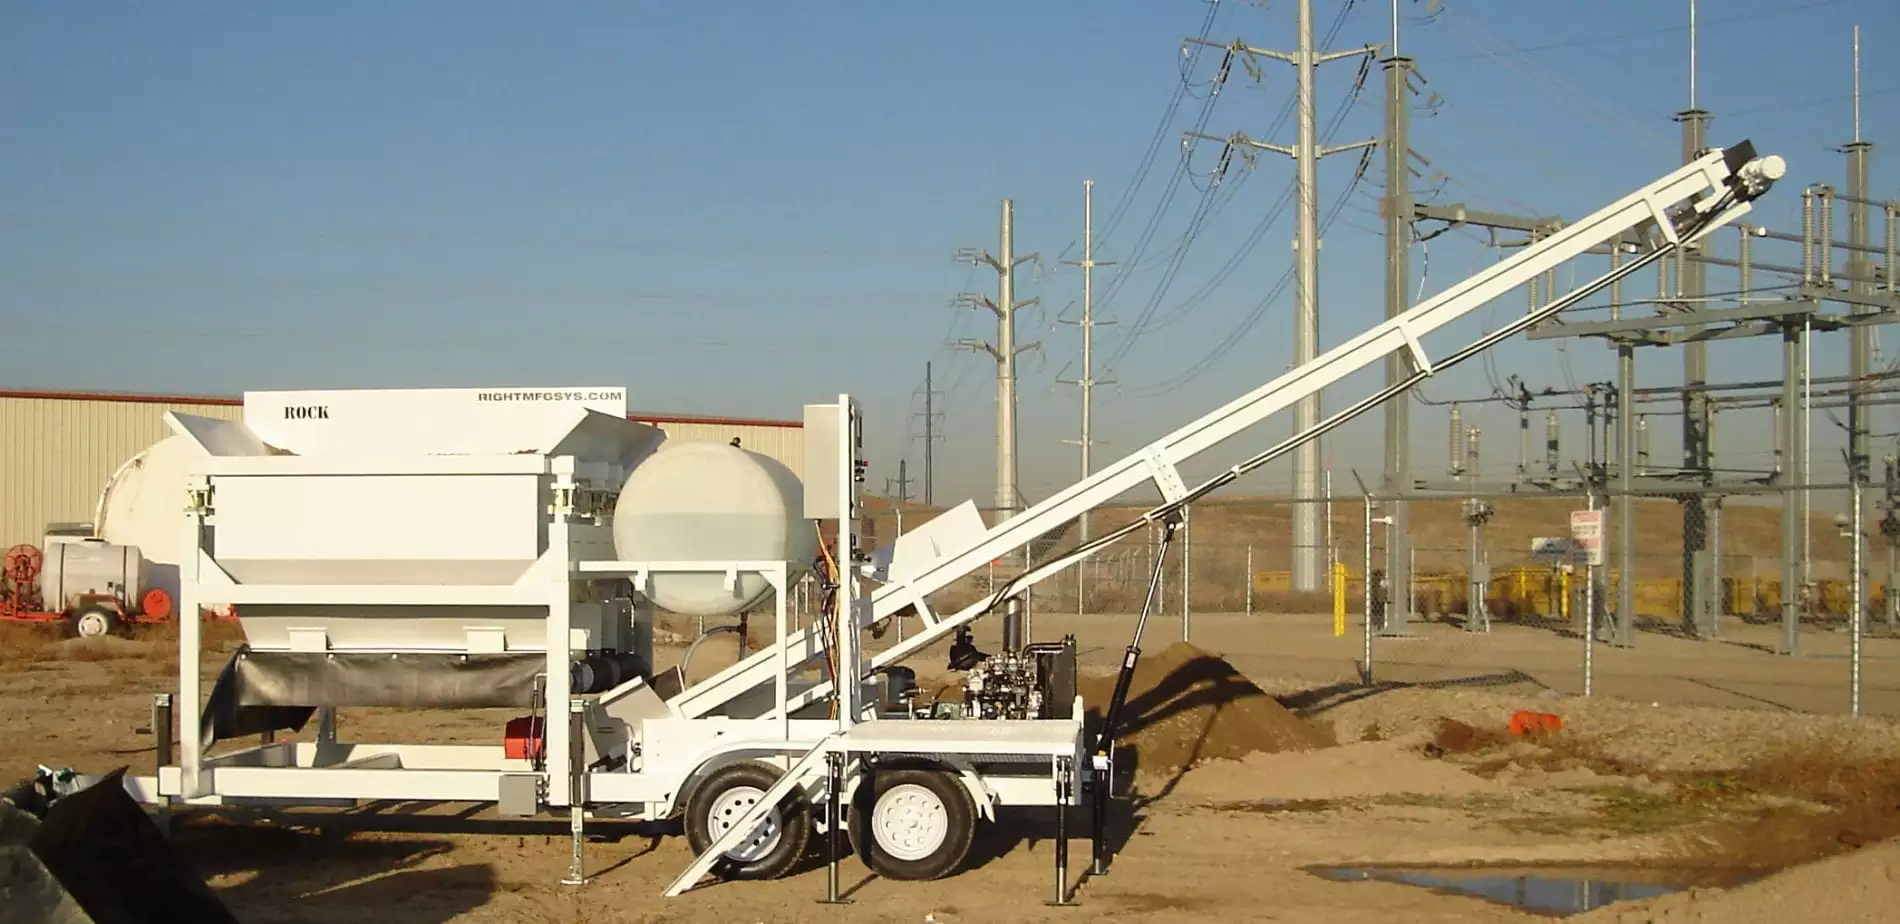 Portable Concrete Batching Plant 12+ Cubic Yards Automated Mix Right 2CL-5-2 Extended Conveyor Side at Right Manufacturing Systems Inc.